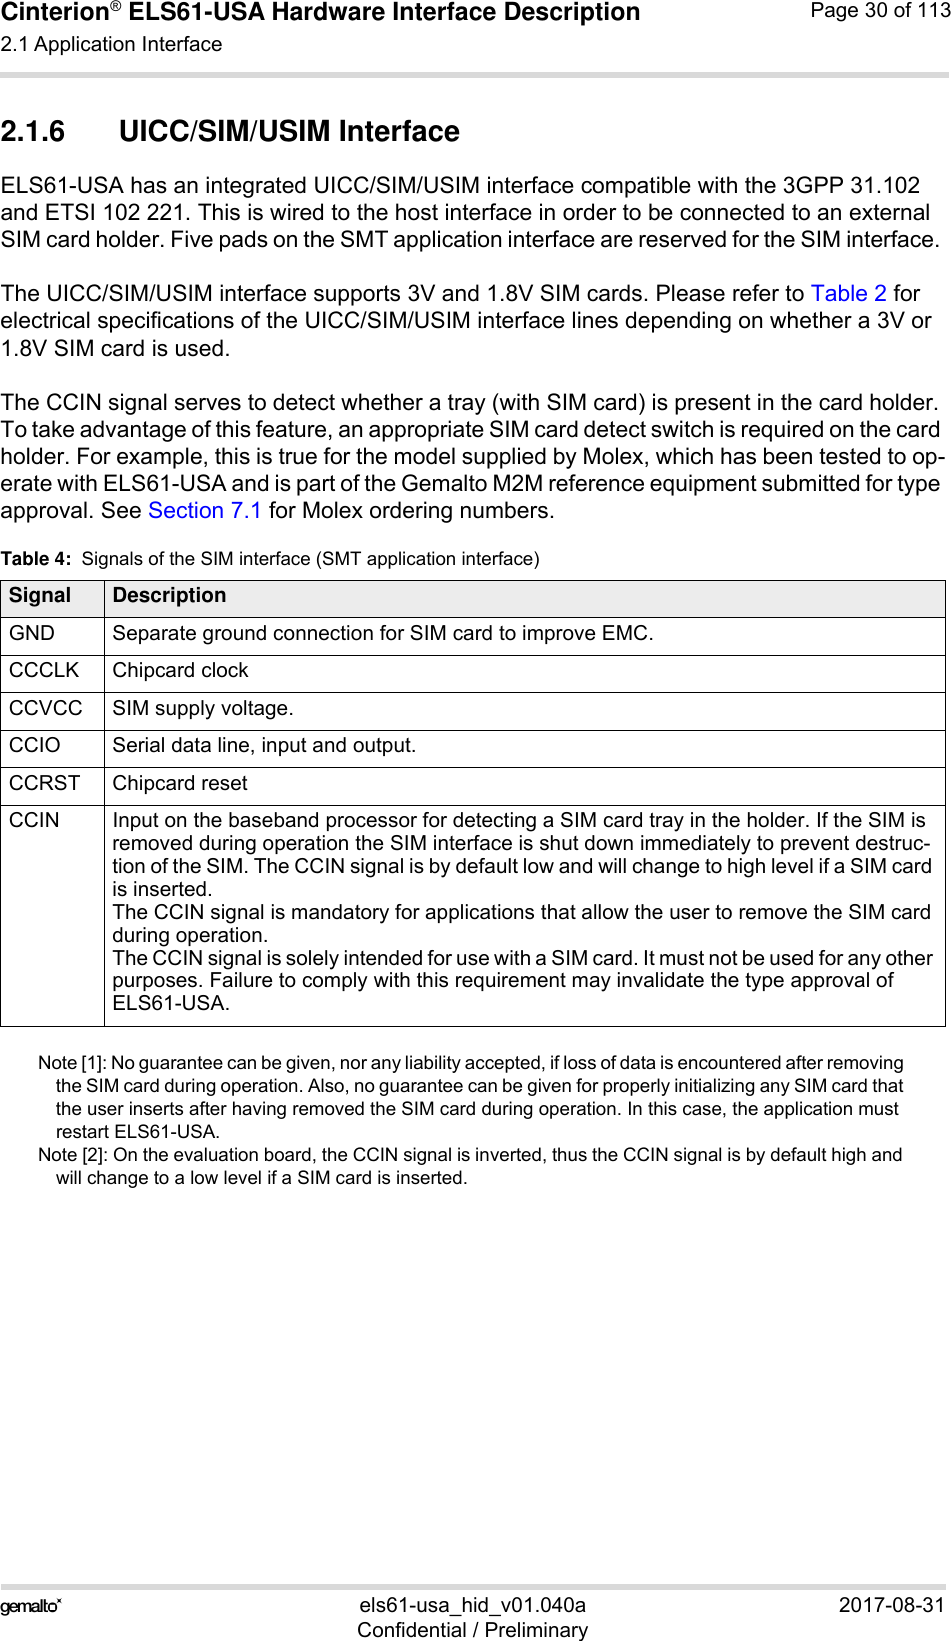 Cinterion® ELS61-USA Hardware Interface Description2.1 Application Interface59els61-usa_hid_v01.040a 2017-08-31Confidential / PreliminaryPage 30 of 1132.1.6 UICC/SIM/USIM InterfaceELS61-USA has an integrated UICC/SIM/USIM interface compatible with the 3GPP 31.102 and ETSI 102 221. This is wired to the host interface in order to be connected to an external SIM card holder. Five pads on the SMT application interface are reserved for the SIM interface. The UICC/SIM/USIM interface supports 3V and 1.8V SIM cards. Please refer to Table 2 for electrical specifications of the UICC/SIM/USIM interface lines depending on whether a 3V or 1.8V SIM card is used.The CCIN signal serves to detect whether a tray (with SIM card) is present in the card holder. To take advantage of this feature, an appropriate SIM card detect switch is required on the card holder. For example, this is true for the model supplied by Molex, which has been tested to op-erate with ELS61-USA and is part of the Gemalto M2M reference equipment submitted for type approval. See Section 7.1 for Molex ordering numbers.Note [1]: No guarantee can be given, nor any liability accepted, if loss of data is encountered after removing the SIM card during operation. Also, no guarantee can be given for properly initializing any SIM card that the user inserts after having removed the SIM card during operation. In this case, the application must restart ELS61-USA.Note [2]: On the evaluation board, the CCIN signal is inverted, thus the CCIN signal is by default high and will change to a low level if a SIM card is inserted. Table 4:  Signals of the SIM interface (SMT application interface)Signal DescriptionGND Separate ground connection for SIM card to improve EMC.CCCLK Chipcard clockCCVCC SIM supply voltage.CCIO Serial data line, input and output.CCRST Chipcard resetCCIN Input on the baseband processor for detecting a SIM card tray in the holder. If the SIM is removed during operation the SIM interface is shut down immediately to prevent destruc-tion of the SIM. The CCIN signal is by default low and will change to high level if a SIM card is inserted.The CCIN signal is mandatory for applications that allow the user to remove the SIM card during operation. The CCIN signal is solely intended for use with a SIM card. It must not be used for any other purposes. Failure to comply with this requirement may invalidate the type approval of ELS61-USA.